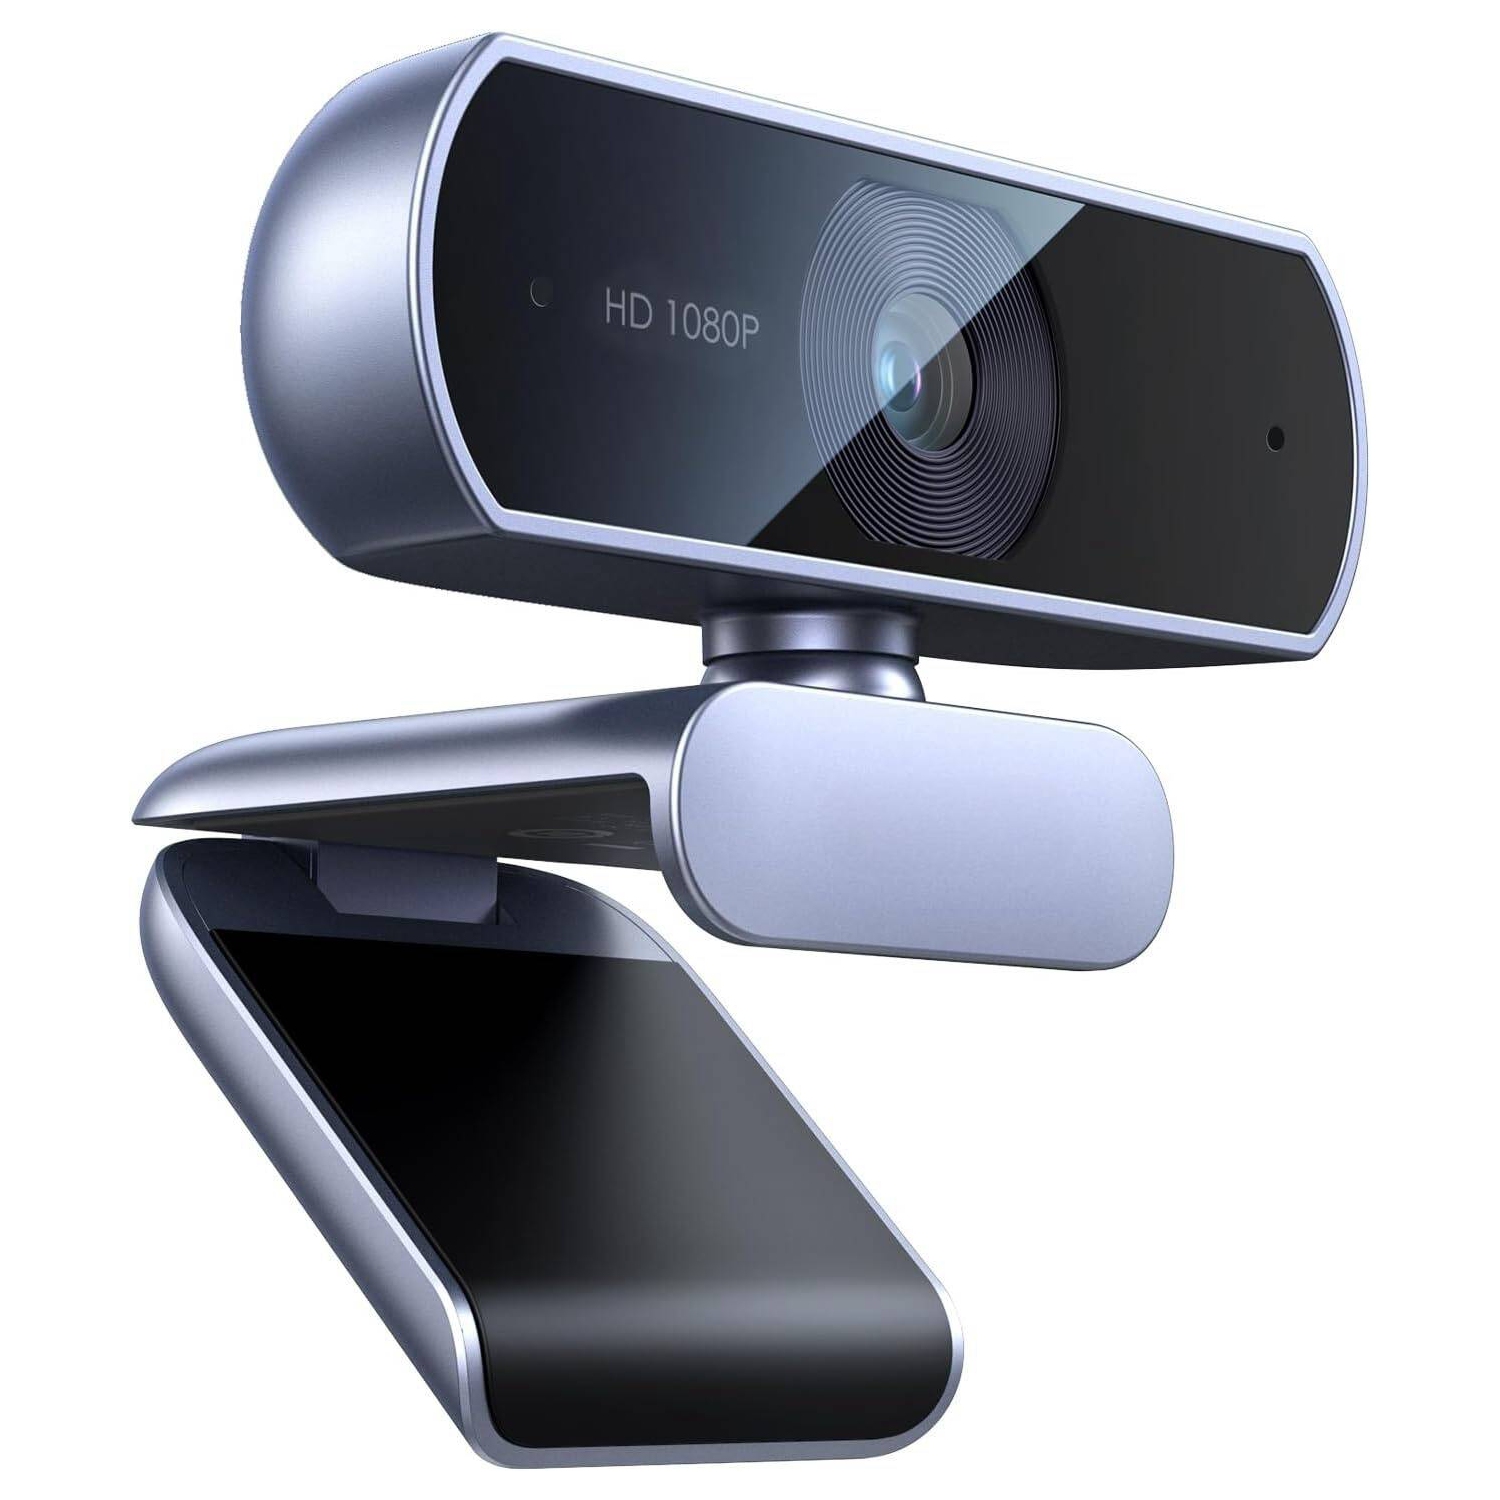 1080P Webcam with Microphone, HD Auto Light Correction Streaming Webcam, 85° View USB Video Webcam forLaptop/Desktop, Calls/Conference, Skype/YouTube